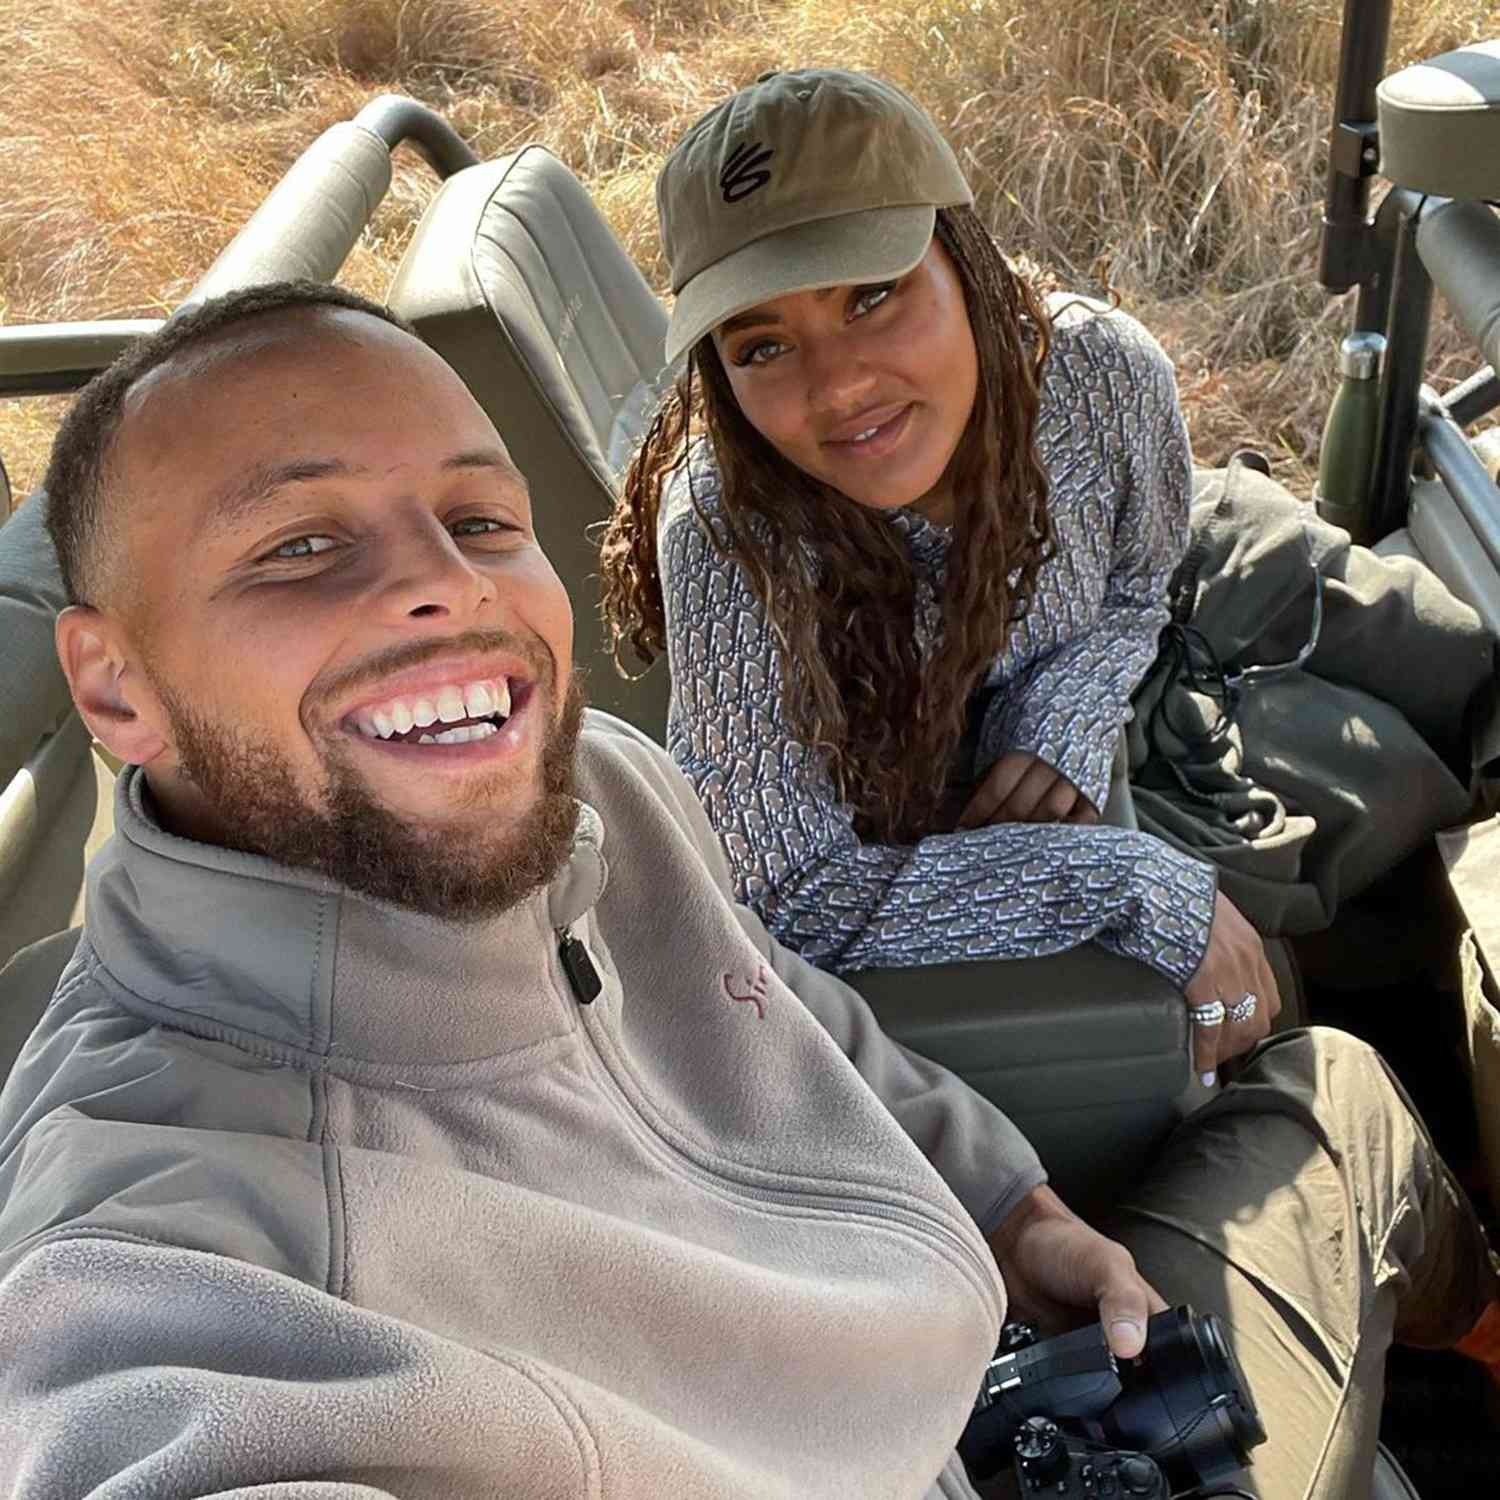 likhoa stephen curry surprised everyone when he organized a memorable th wedding anniversary for his wife ayesha curry 6548fc6fd69c2 Stephen Curry Surprised Everyone When He Organized A Memorable 10th Wedding Anniversary For His Wife Ayesha Curry.